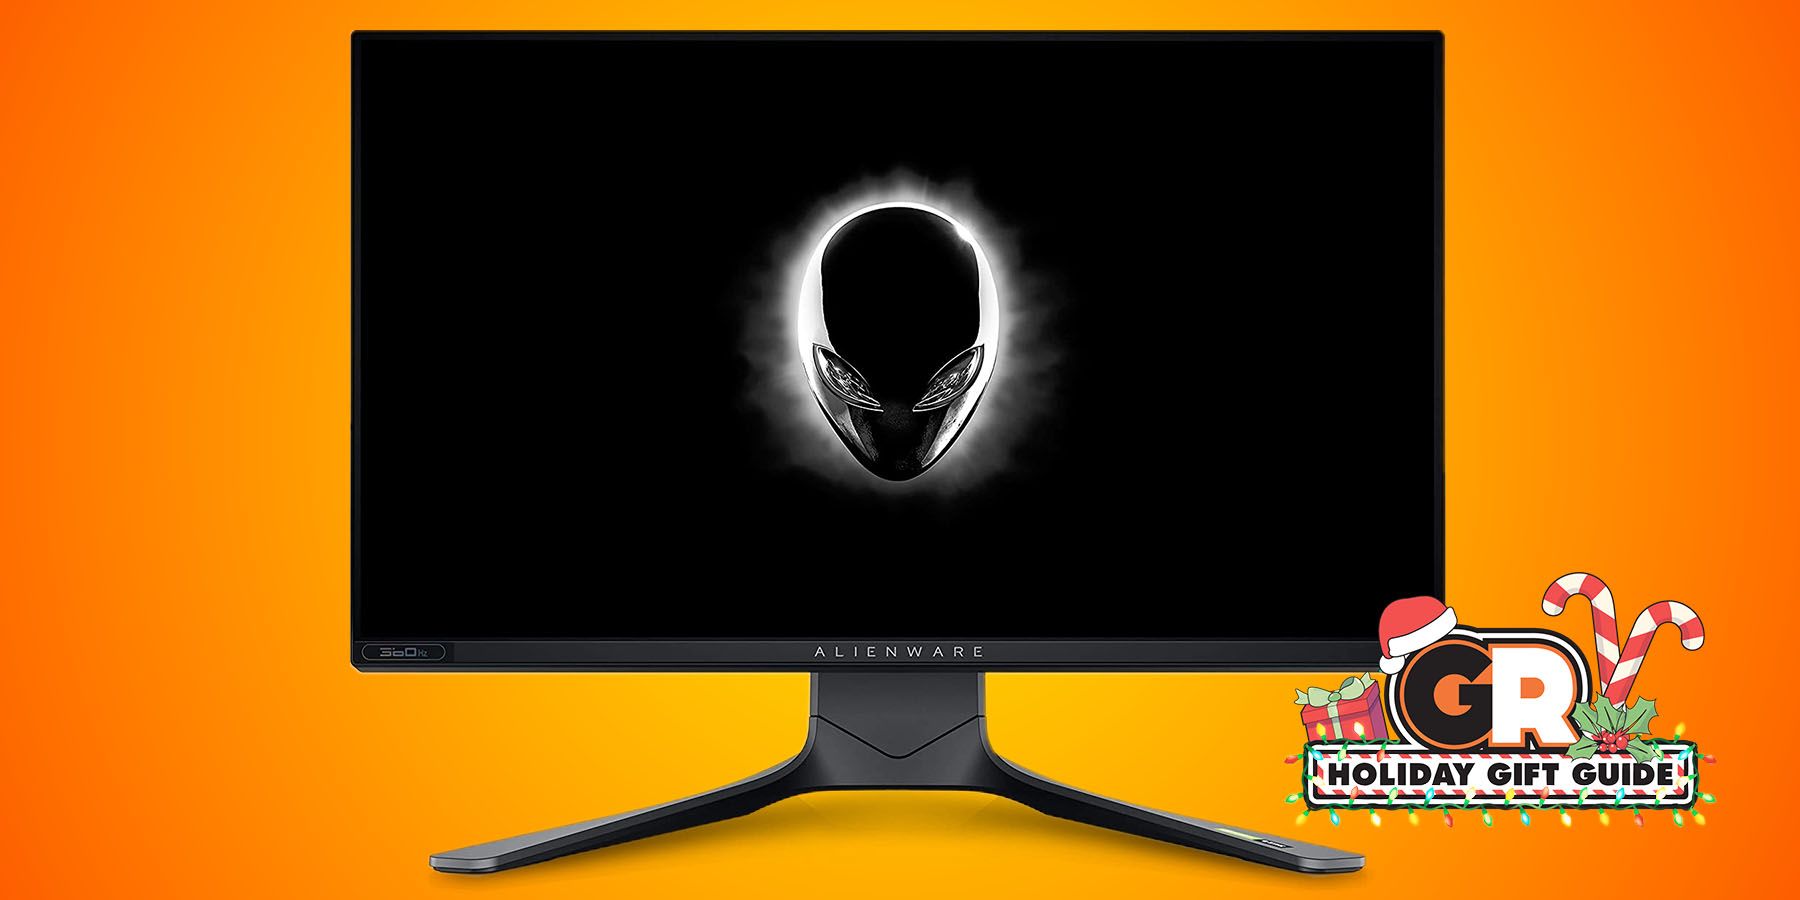 Elevate your battlestation with up to $475 off Alienware, monitor 360hz  alienware 